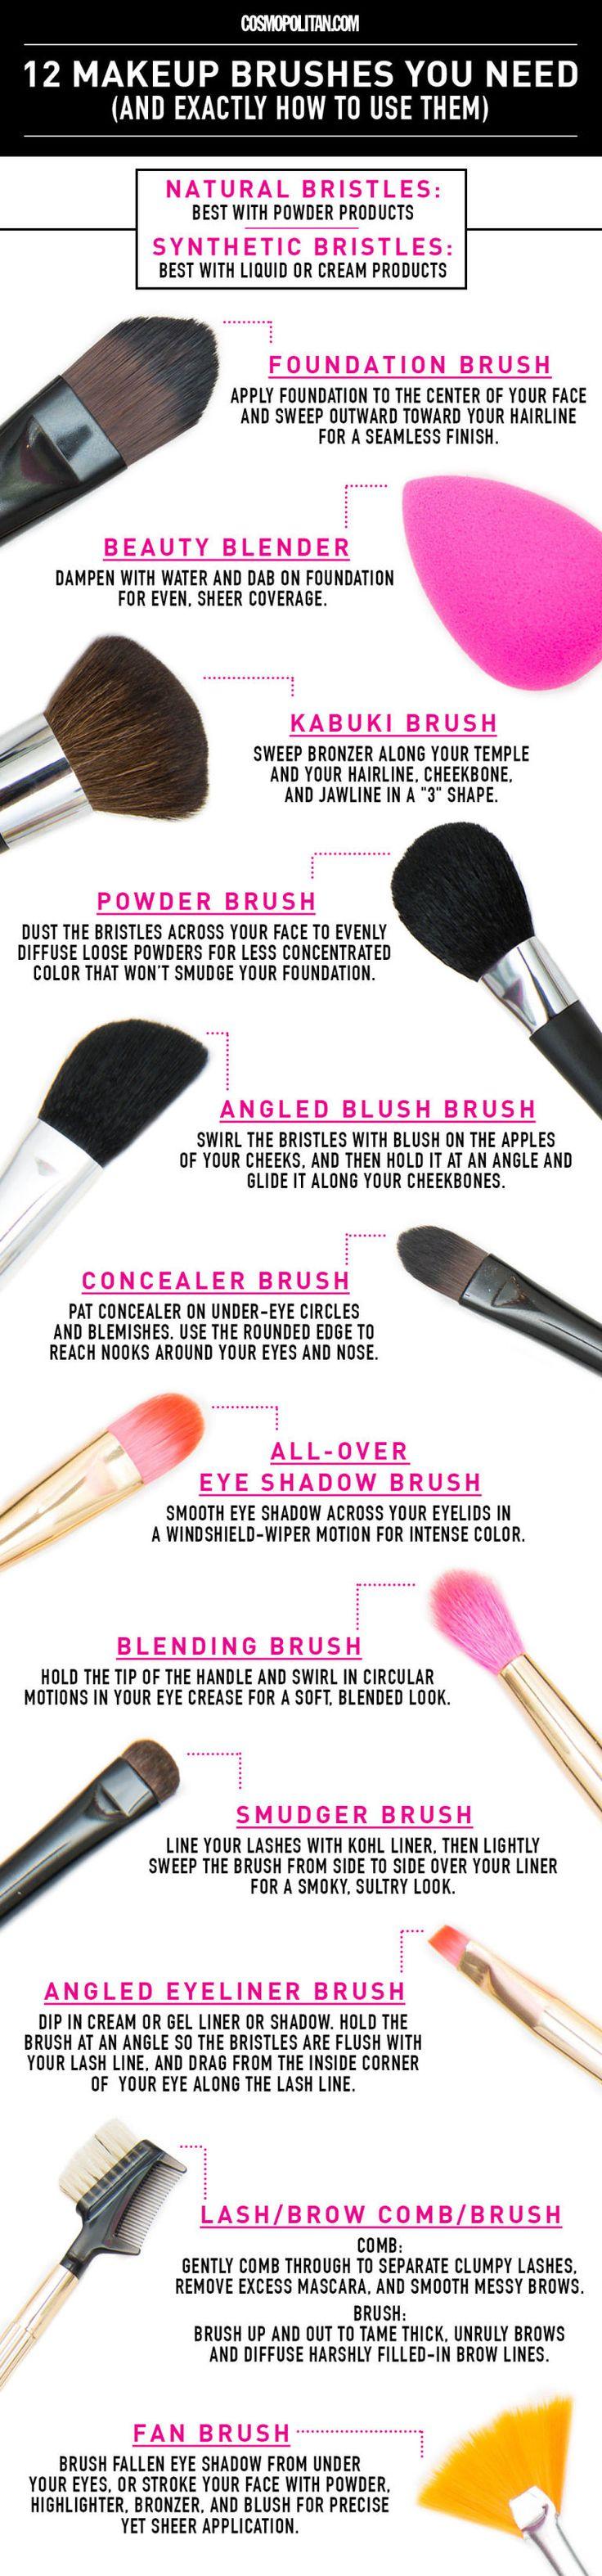 Wedding - 12 Makeup Brushes You Need And Exactly How To Use Them